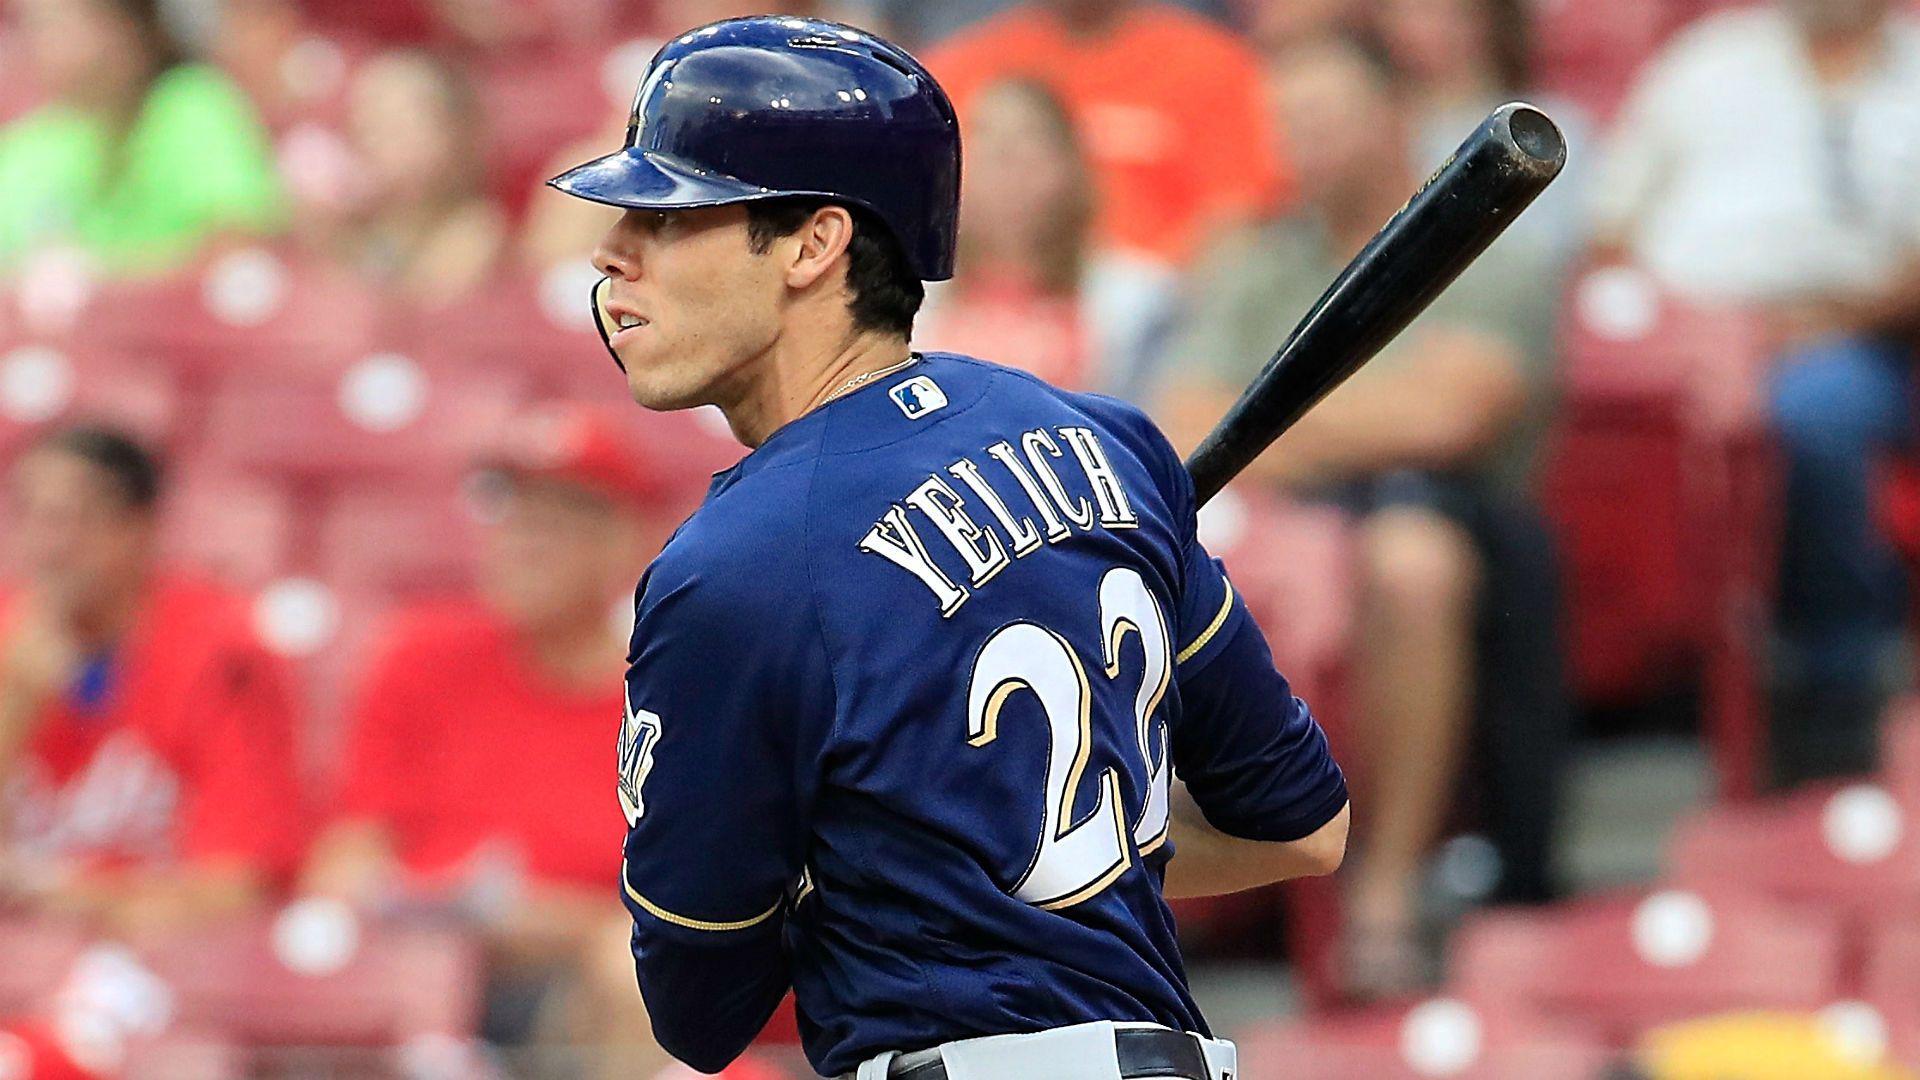 Christian Yelich rides to Brewers' rescue on cycle, retains second.